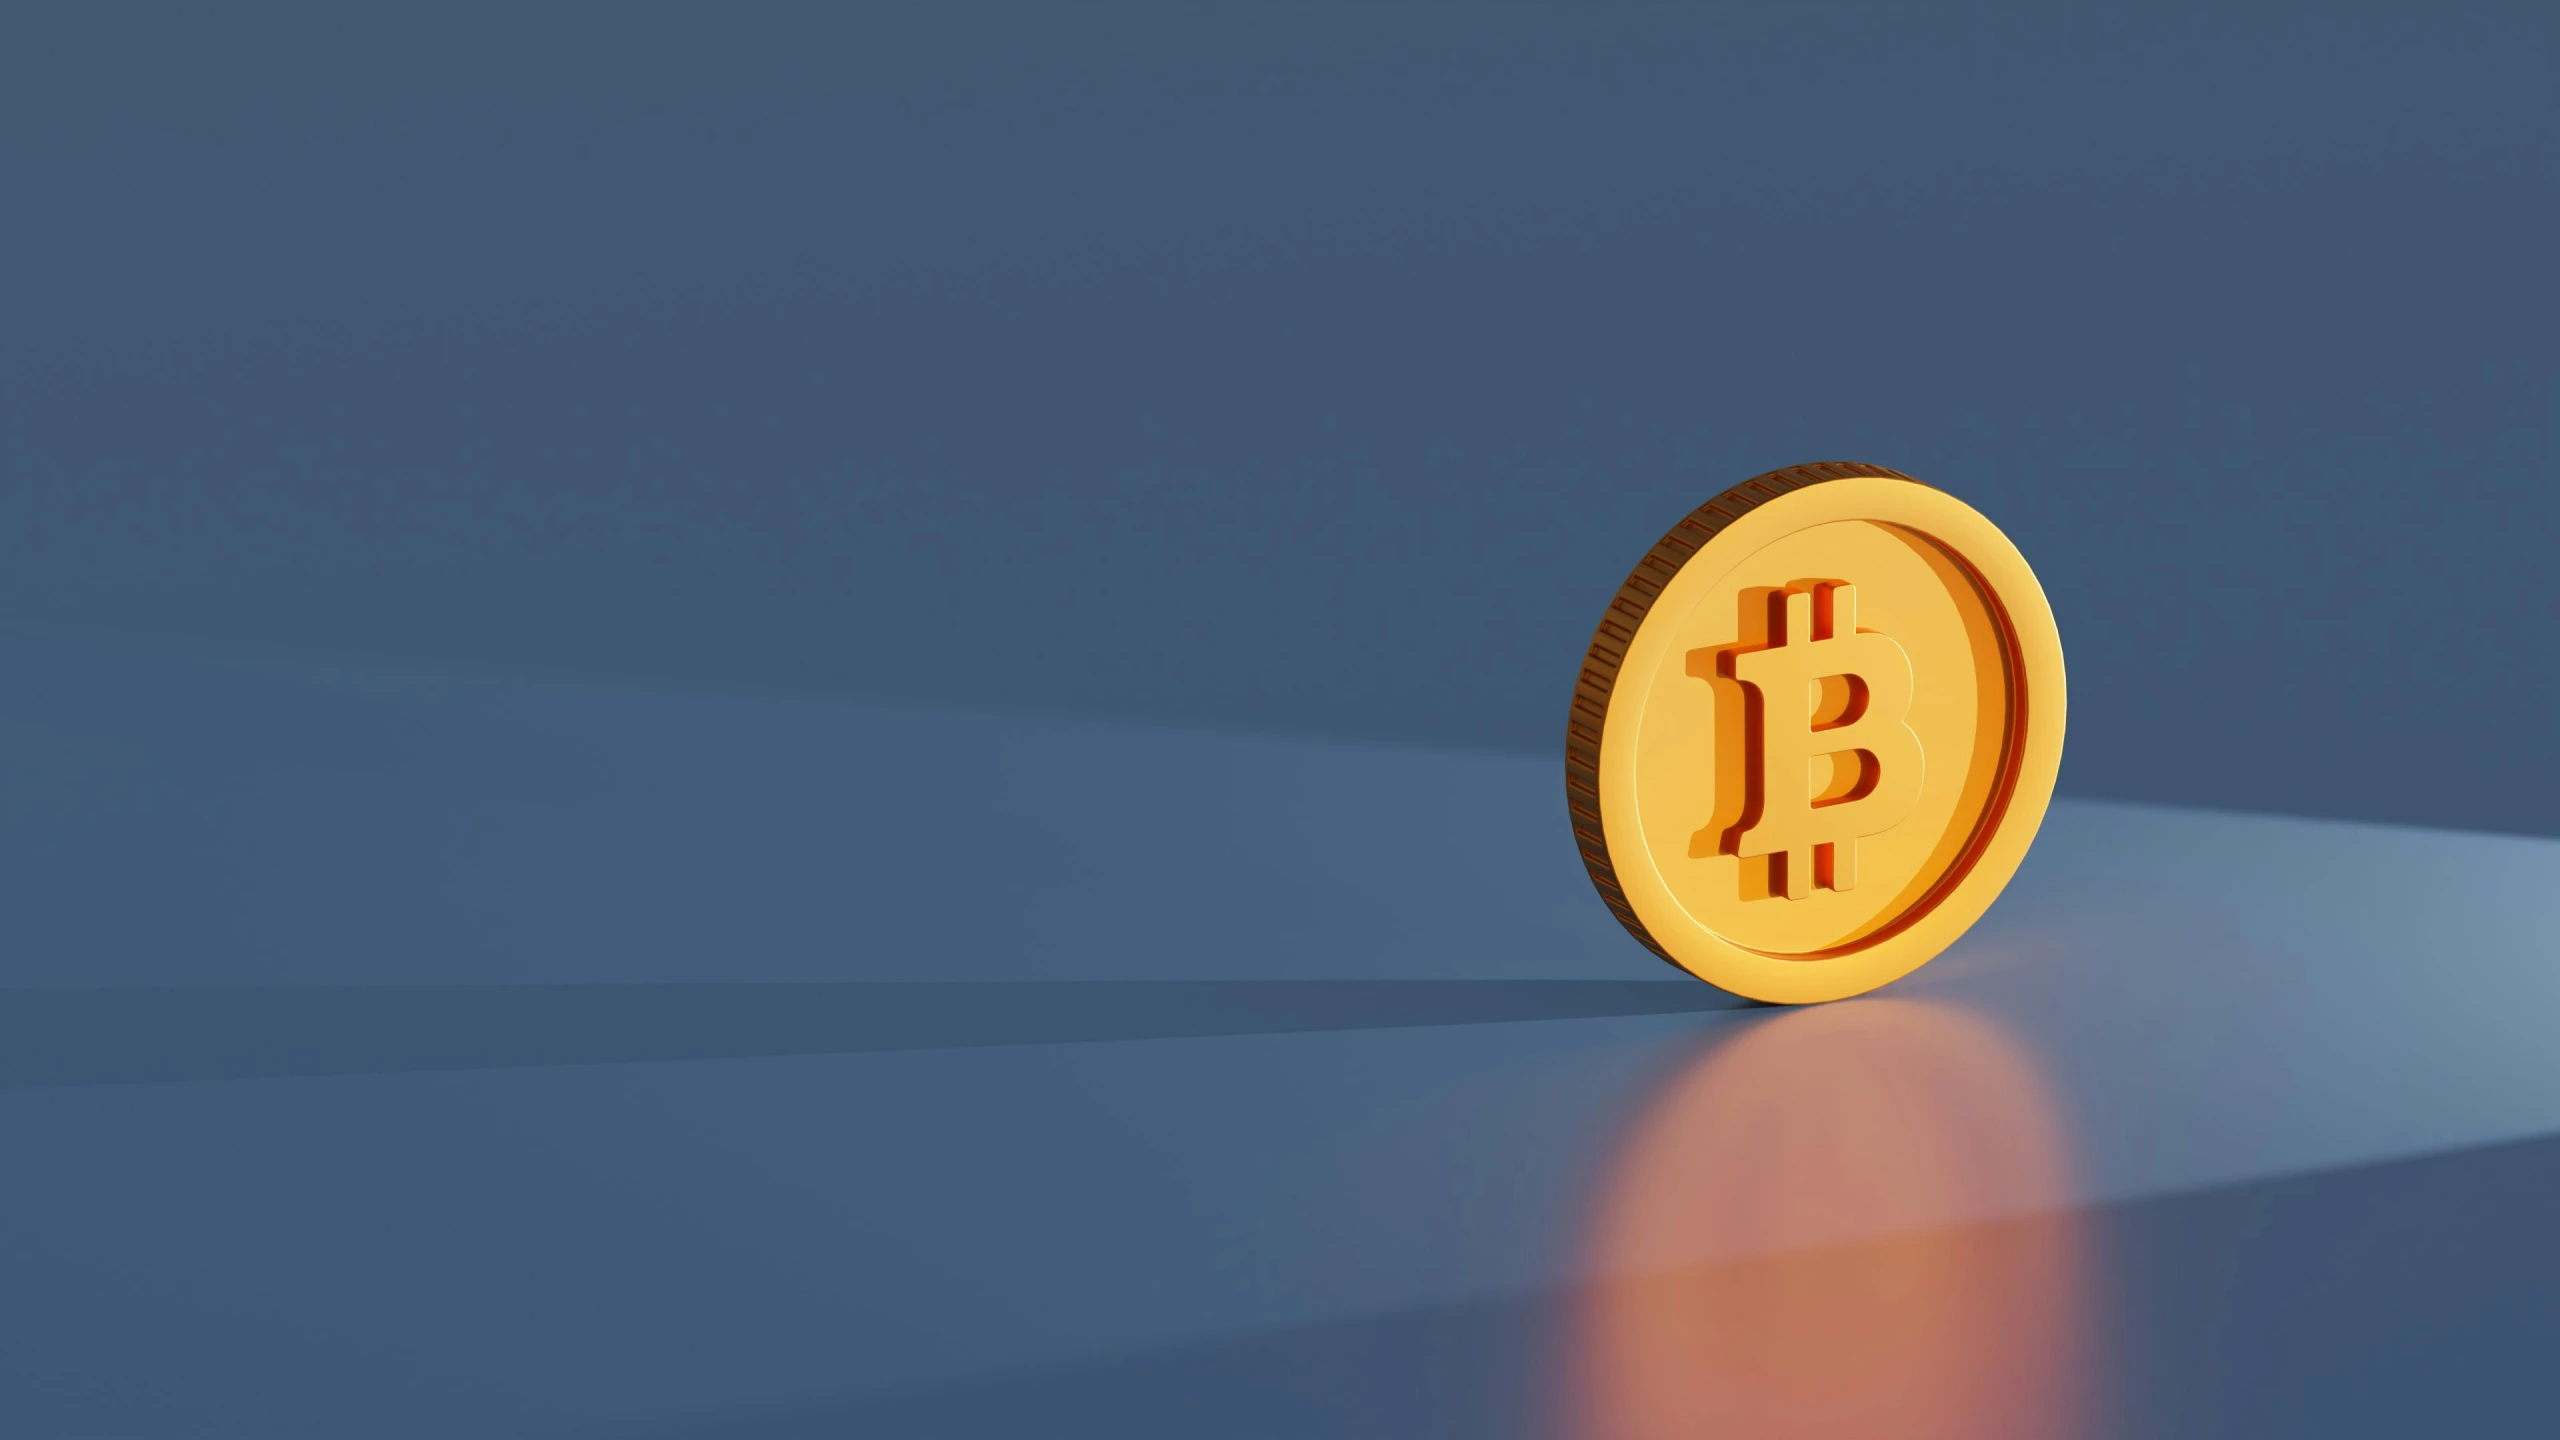 a golden bitcoin is shown with reflection in the background